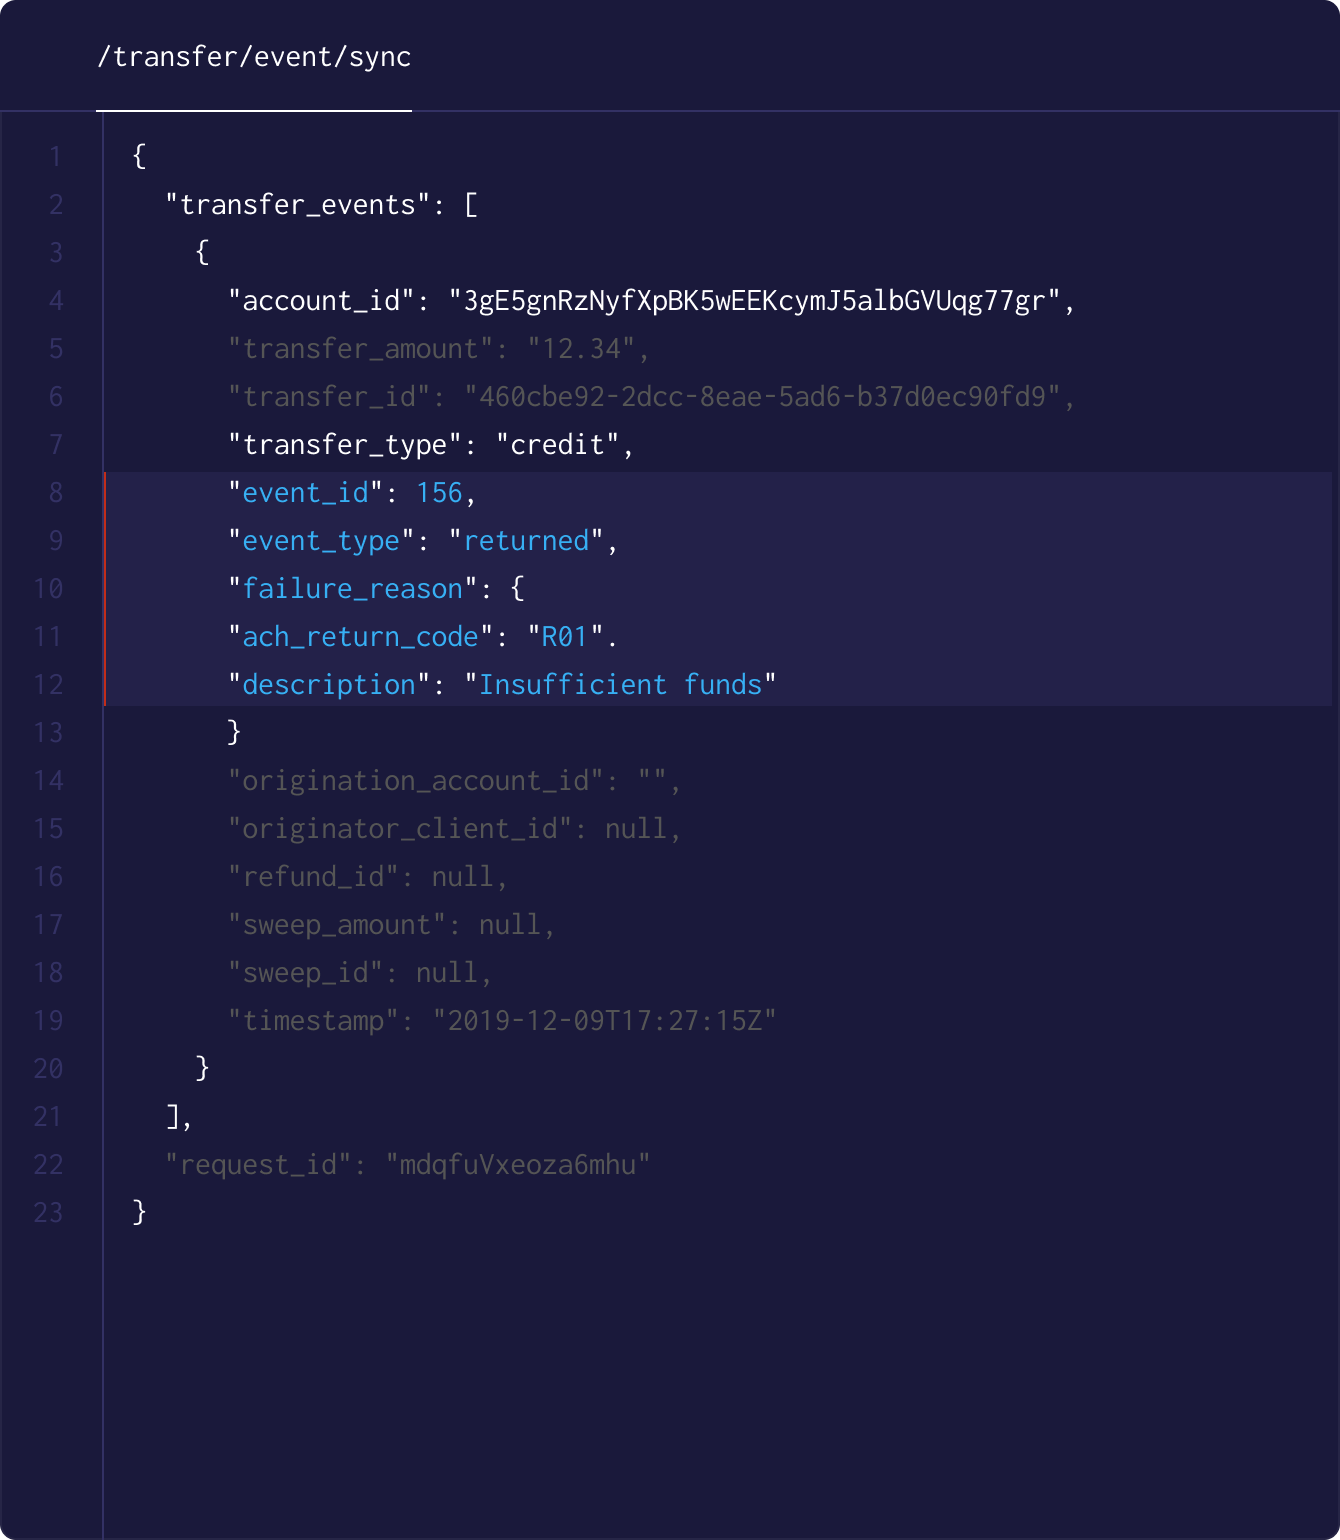 JSON payload highlighting "insufficient funds"